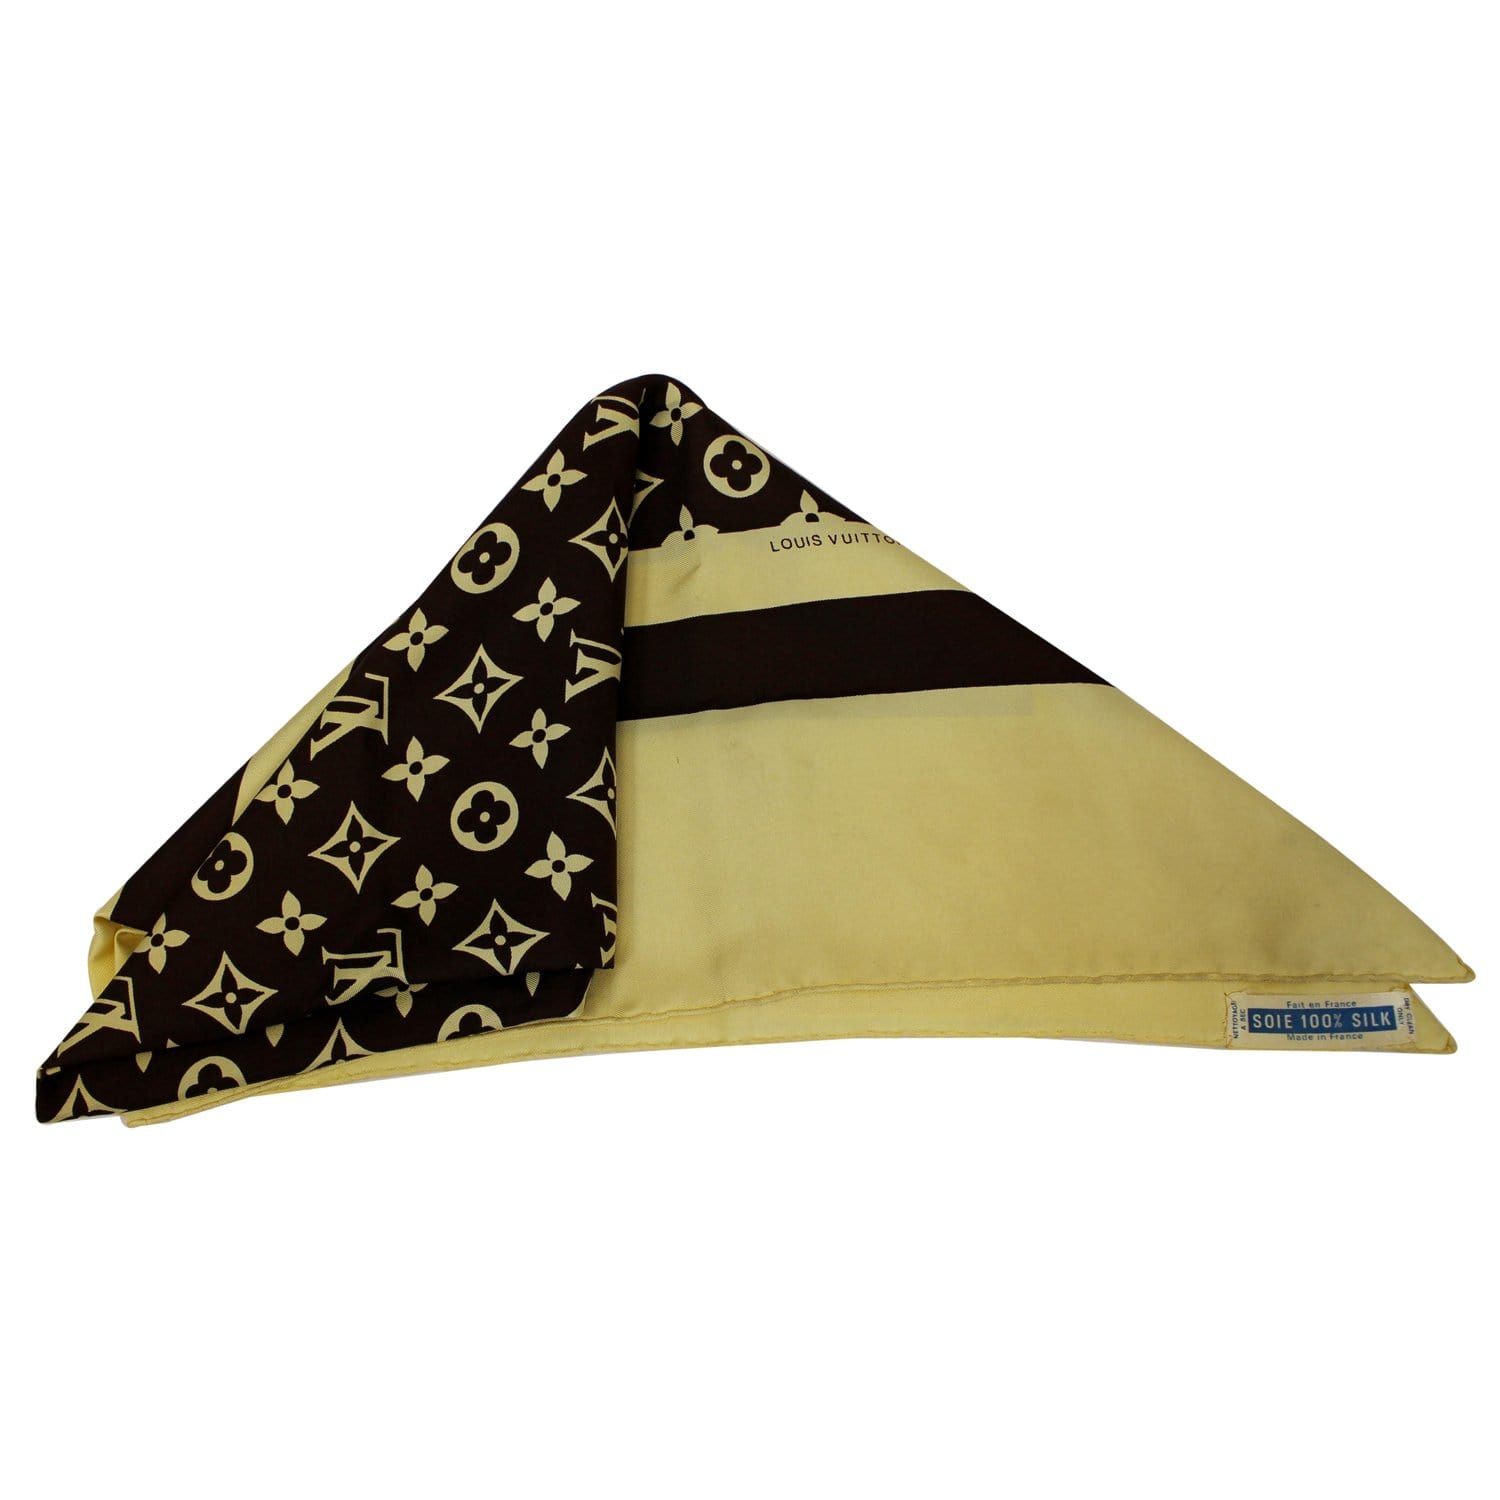 Louis Vuitton Monogram Confidential Silk Scarf - Brown Scarves and Shawls,  Accessories - LOU802458